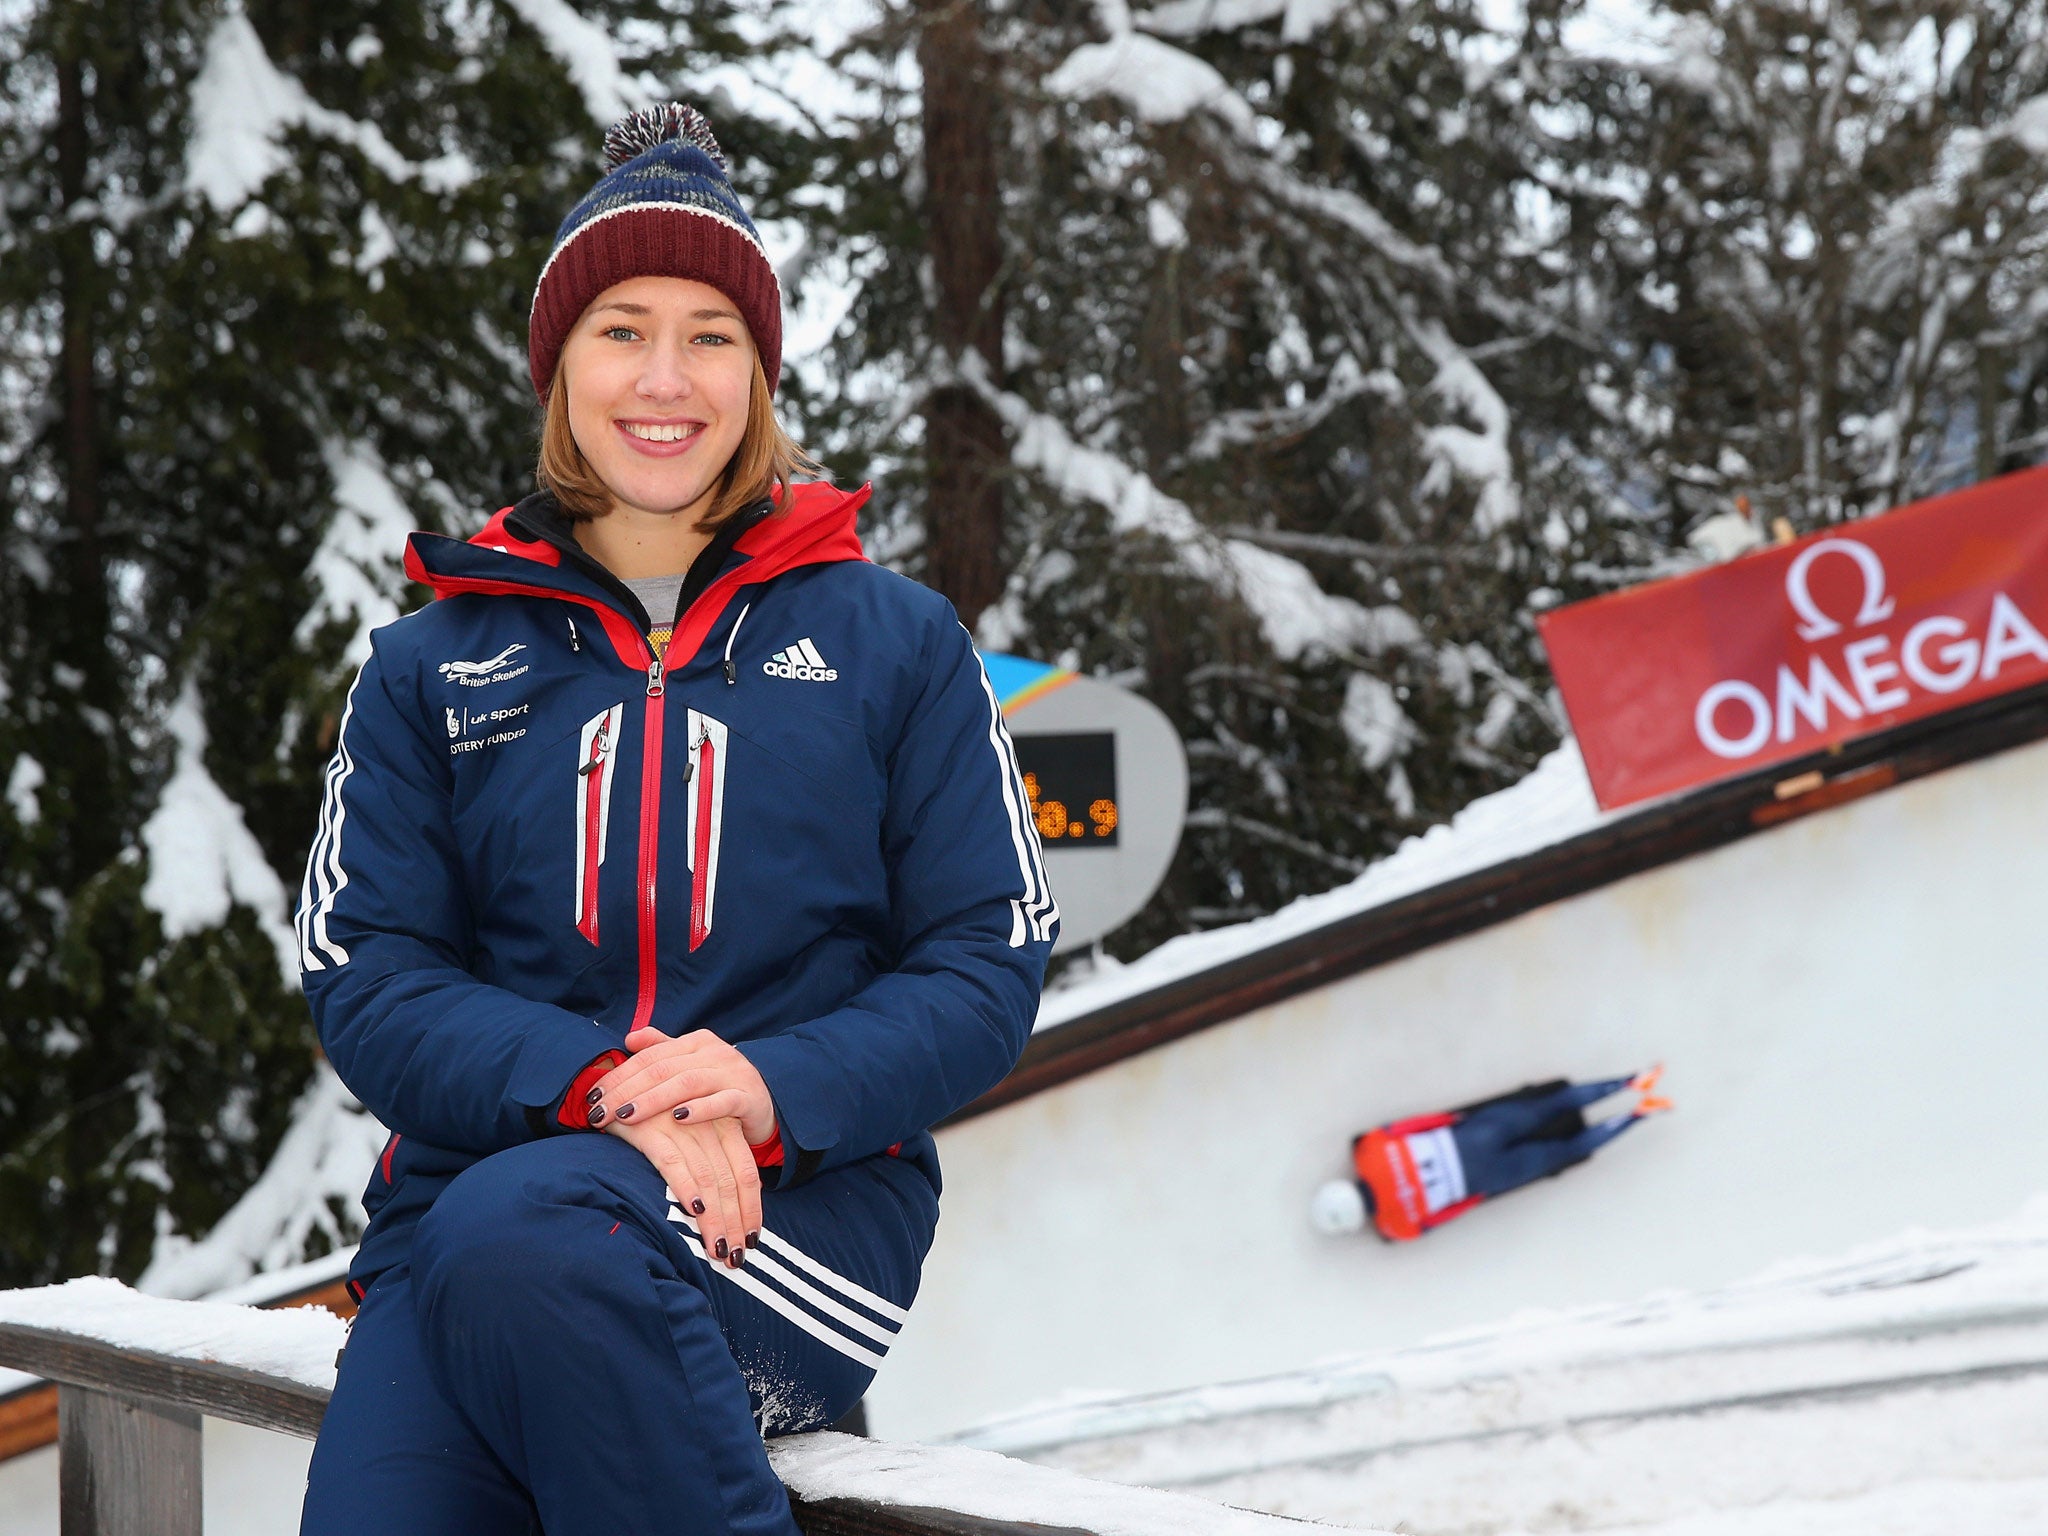 Lizzy Yarnold is among the brightest hopes for Team GB in Sochi